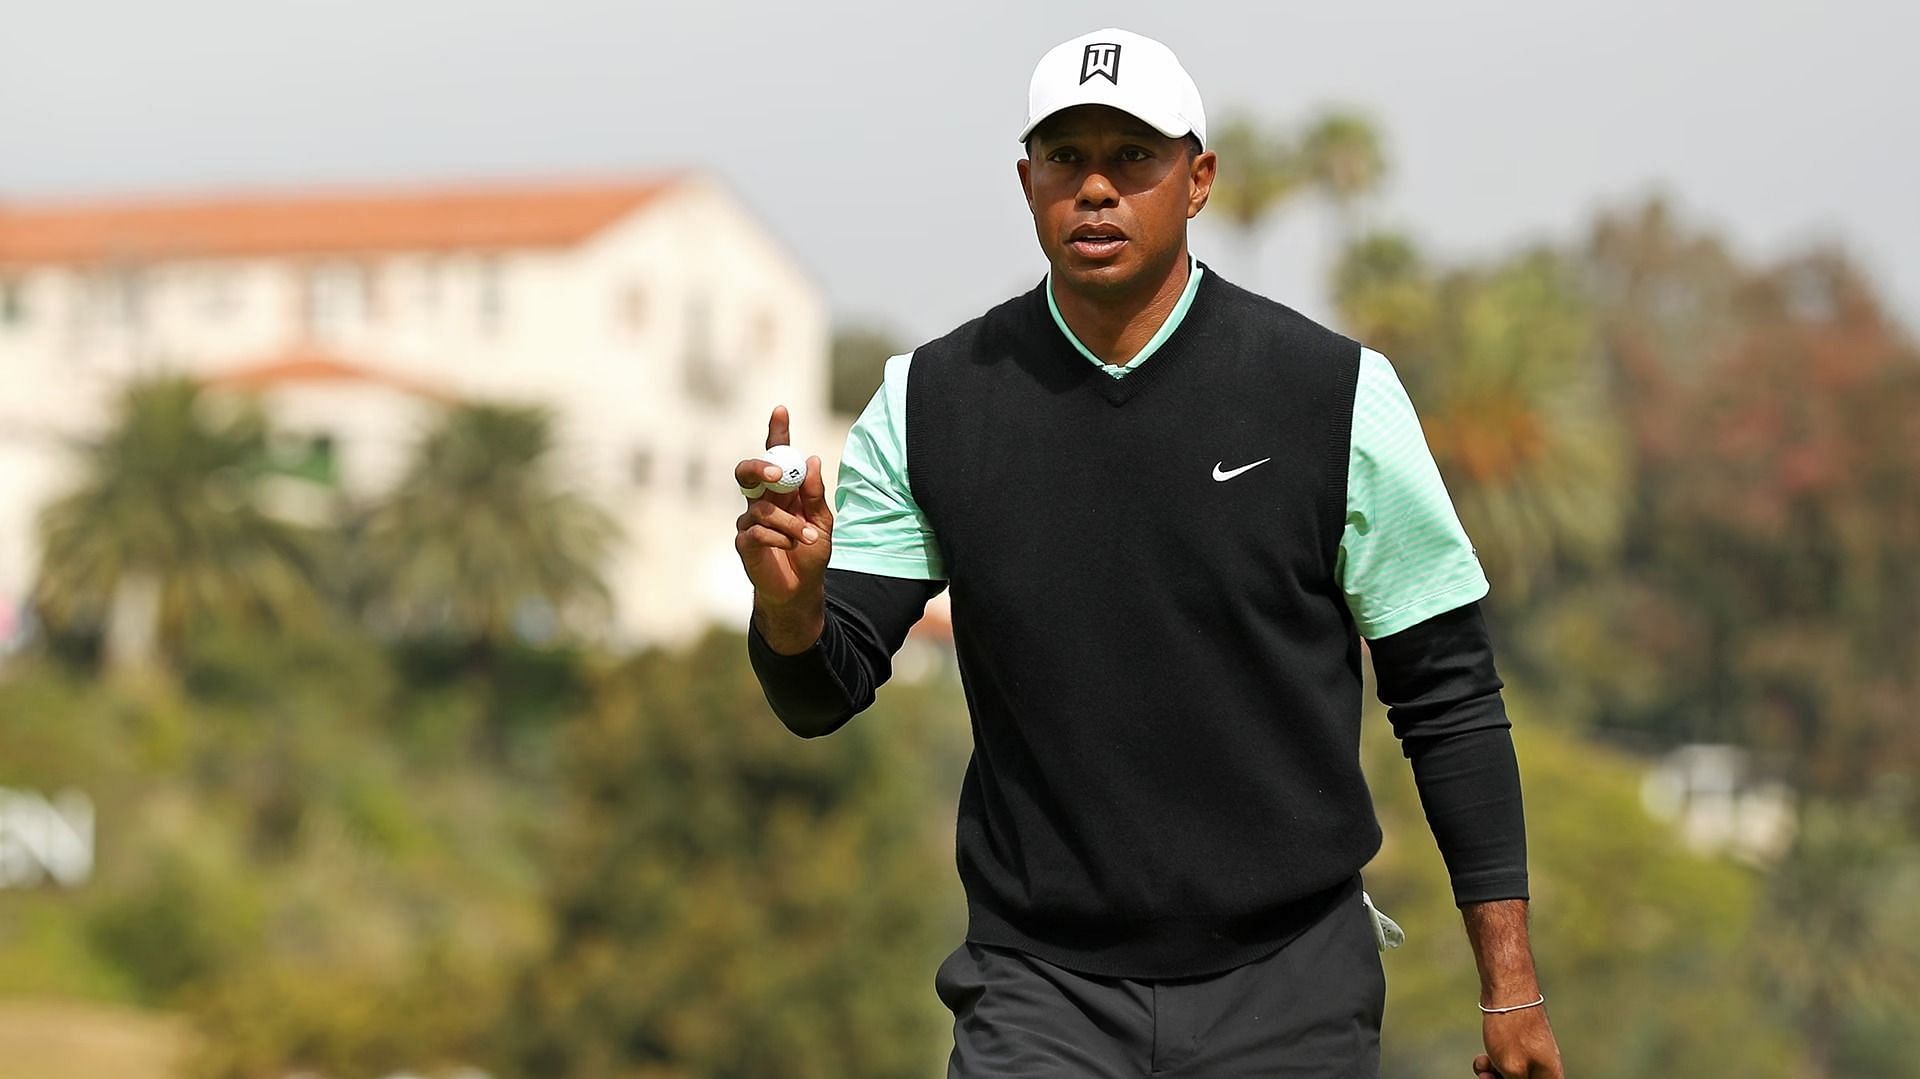 Tiger Woods finished 68th at the Genesis Invitational 2020